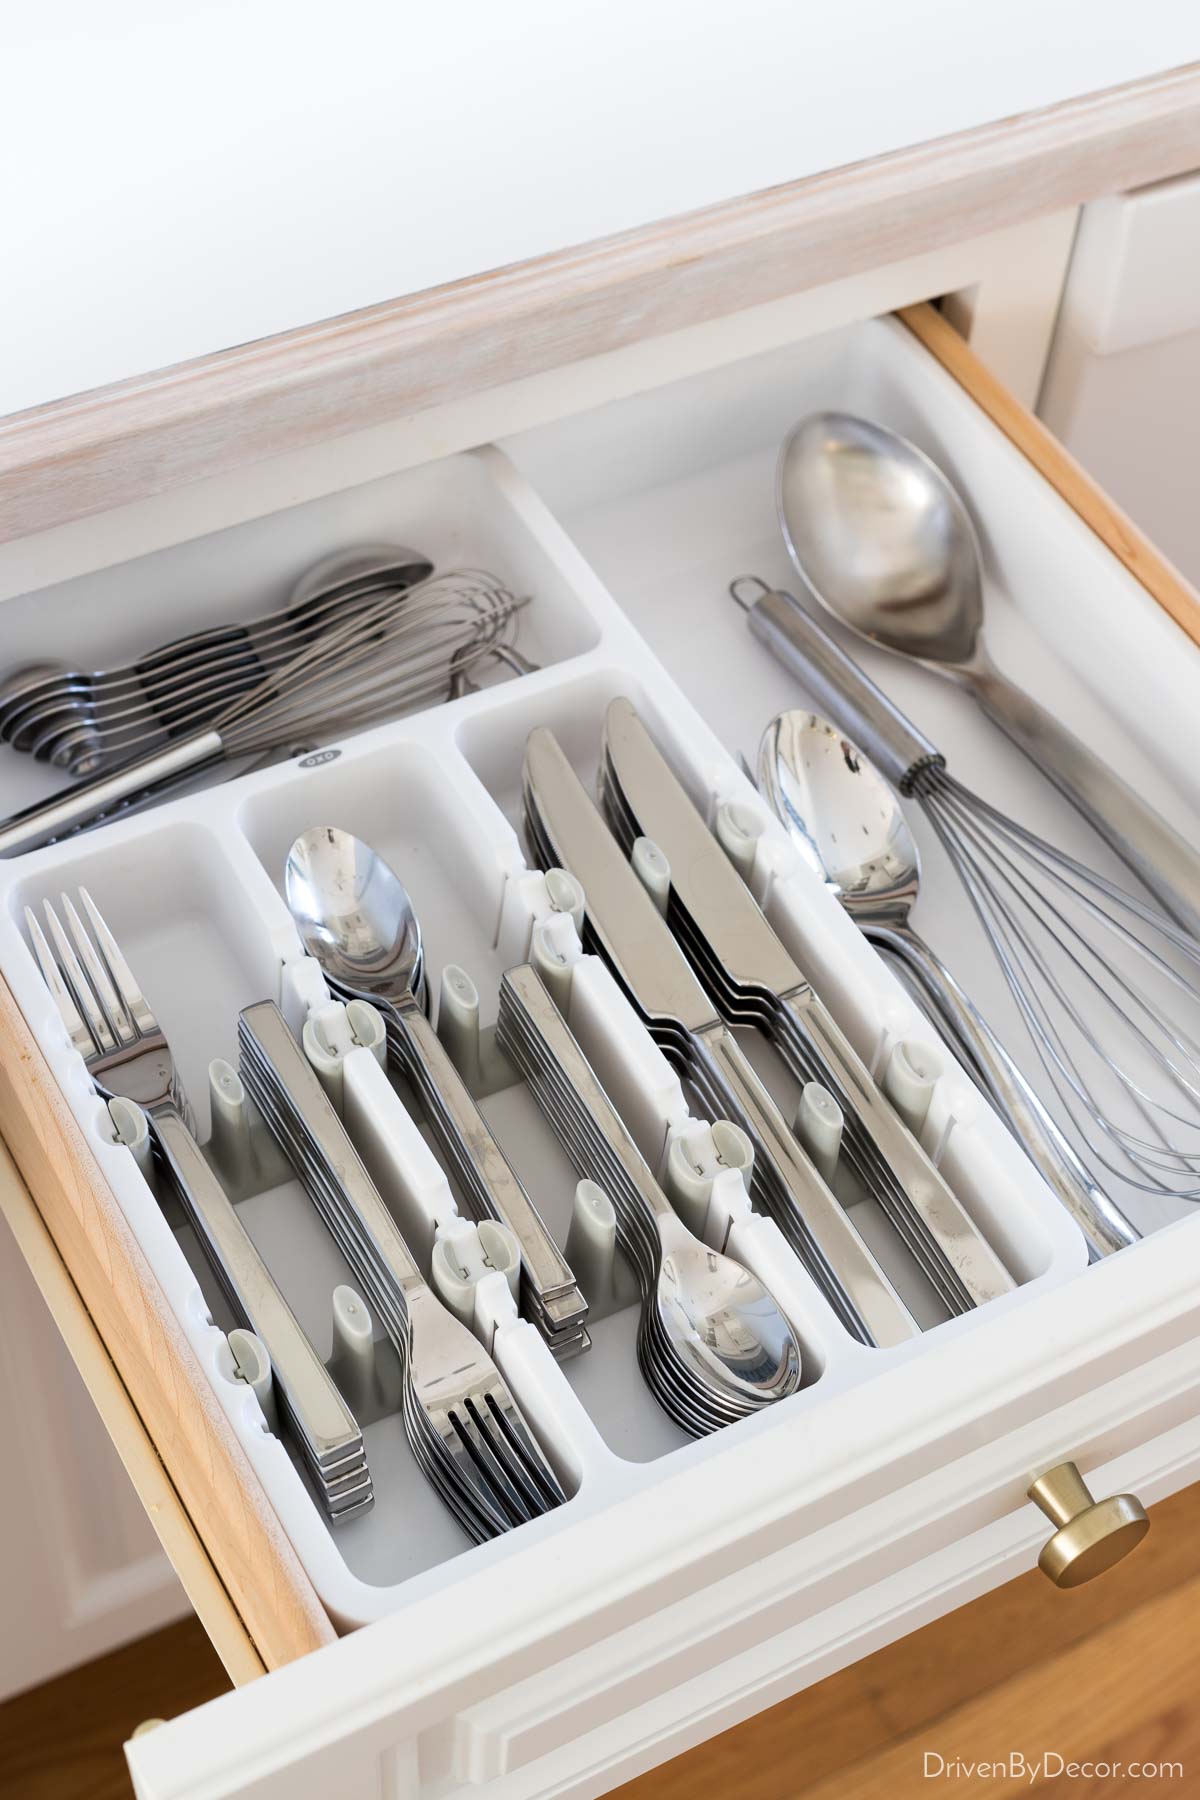 8 of the Best Kitchen Drawer Organizers in 2023, According to the